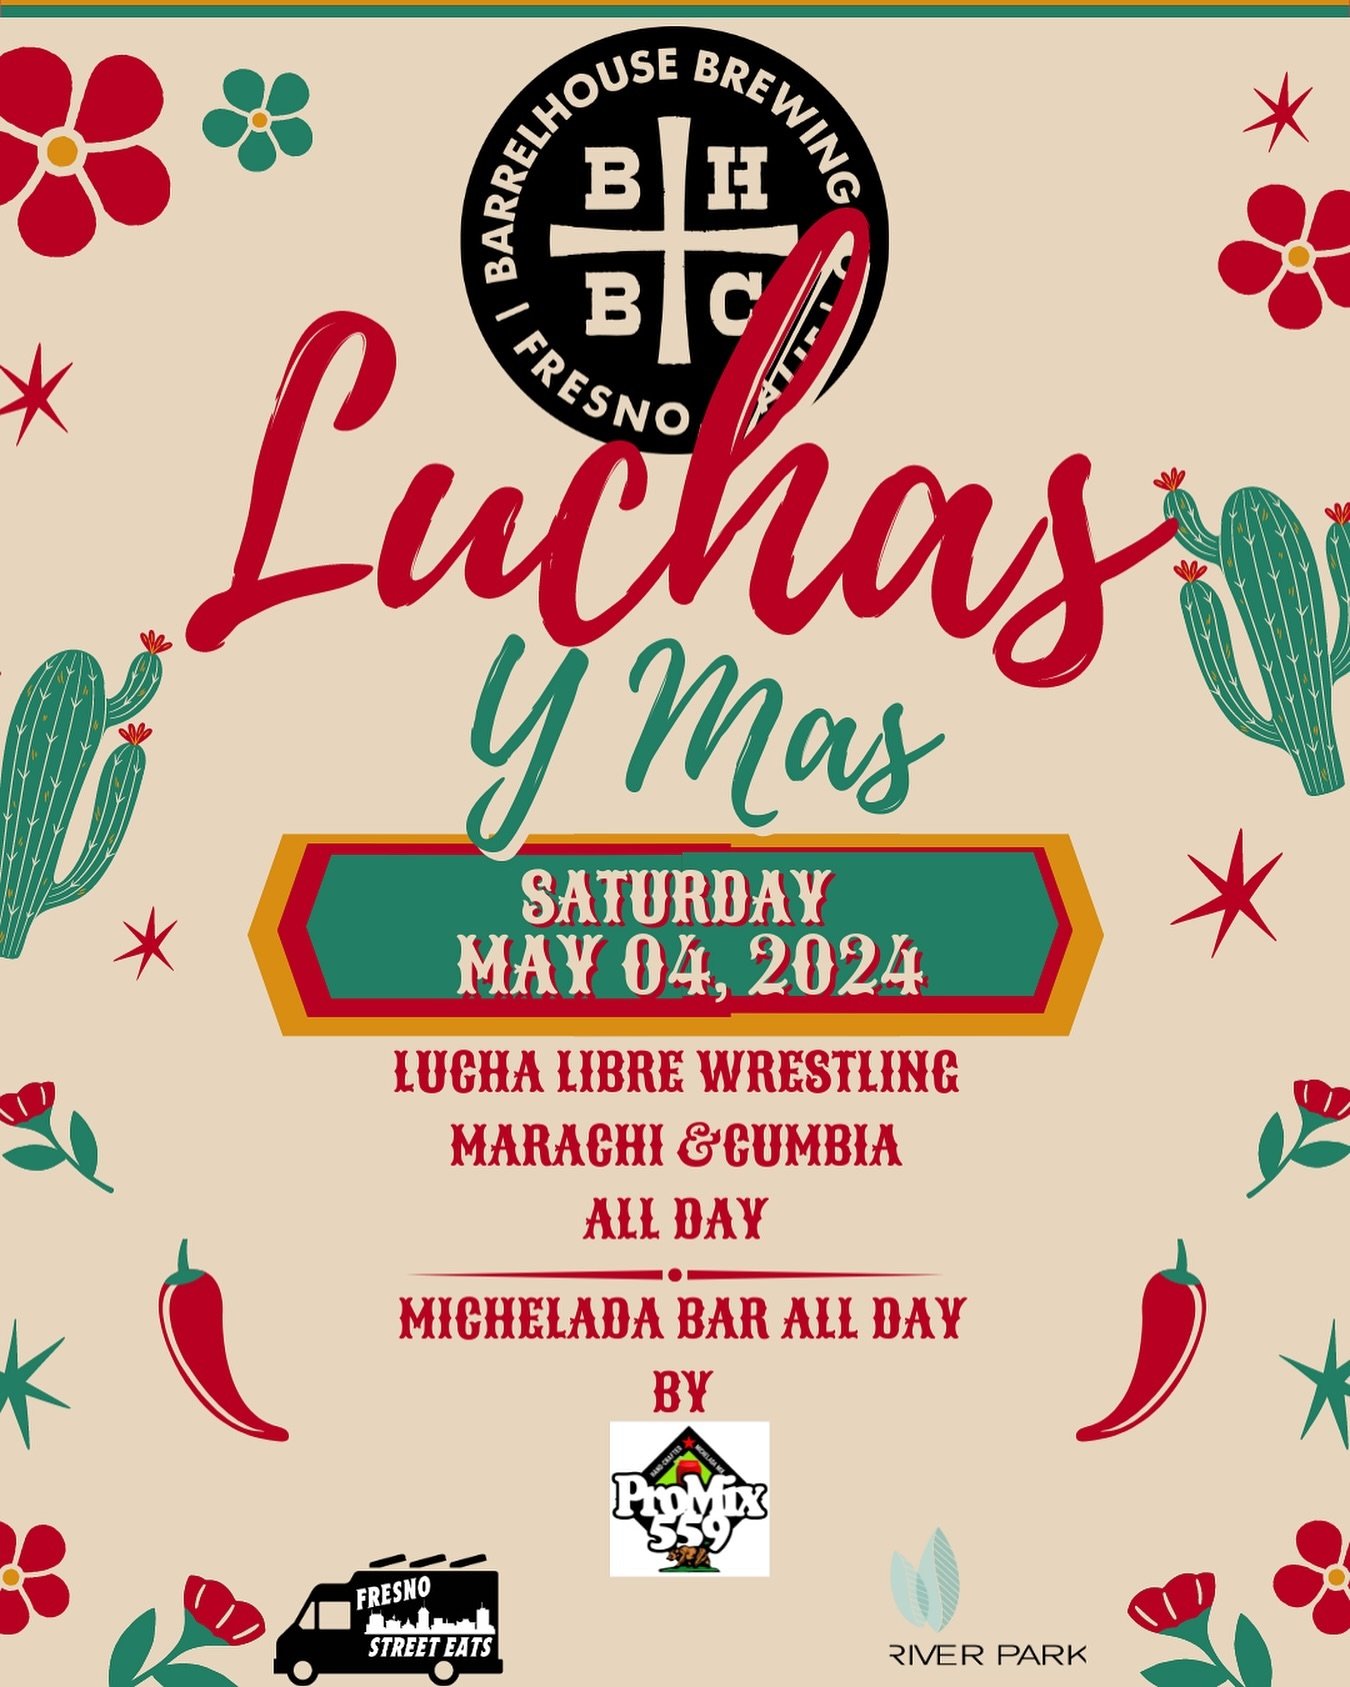 Luchas Y M&aacute;s🍻
Join us all day for Micheladas, Live Music, &amp; Good Times! 
All day starting at 11am - Midnight 🌶️
Cheers ✨
#goodpeoplegoodtimesgreatbeer